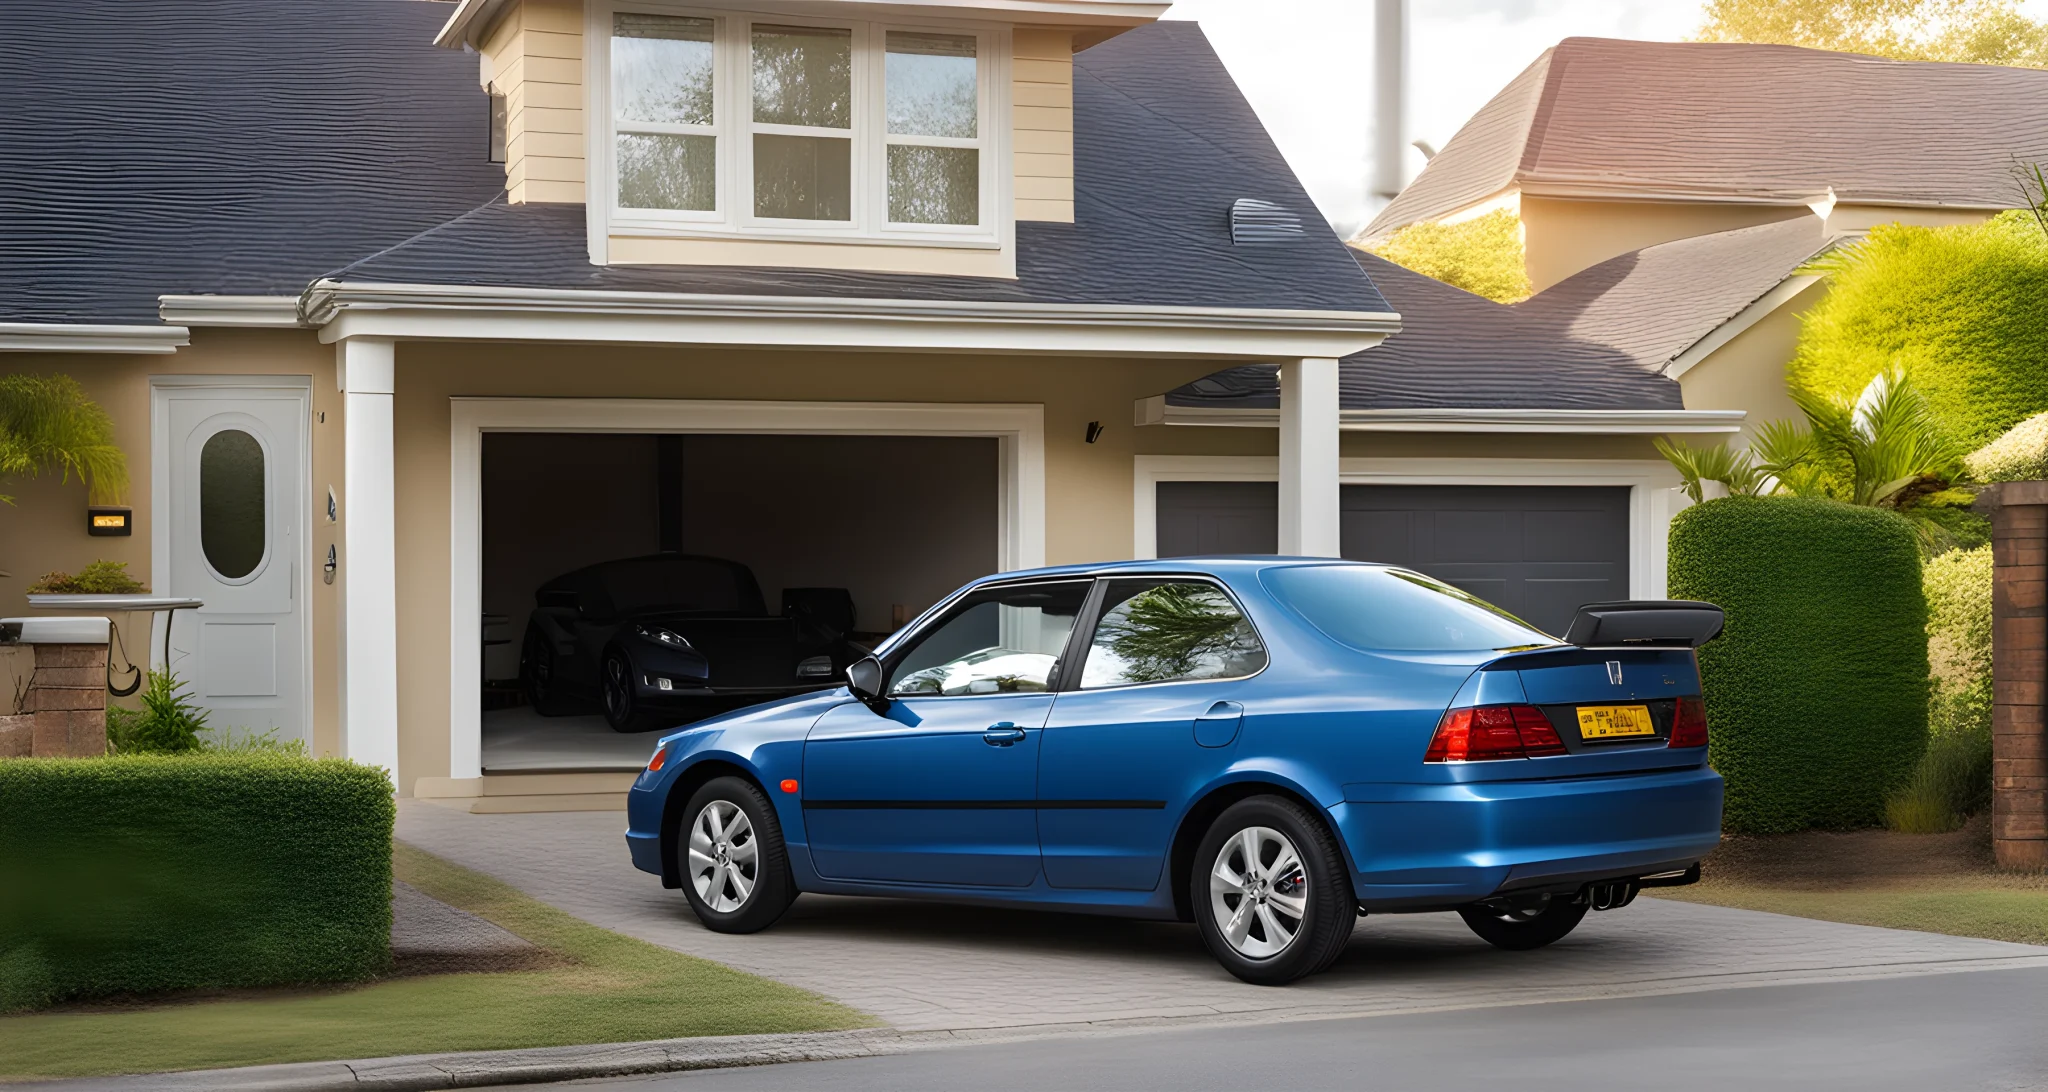 The image shows a Honda car parked in a driveway, with a laptop open on the driver's seat and a stack of insurance paperwork on the passenger seat.